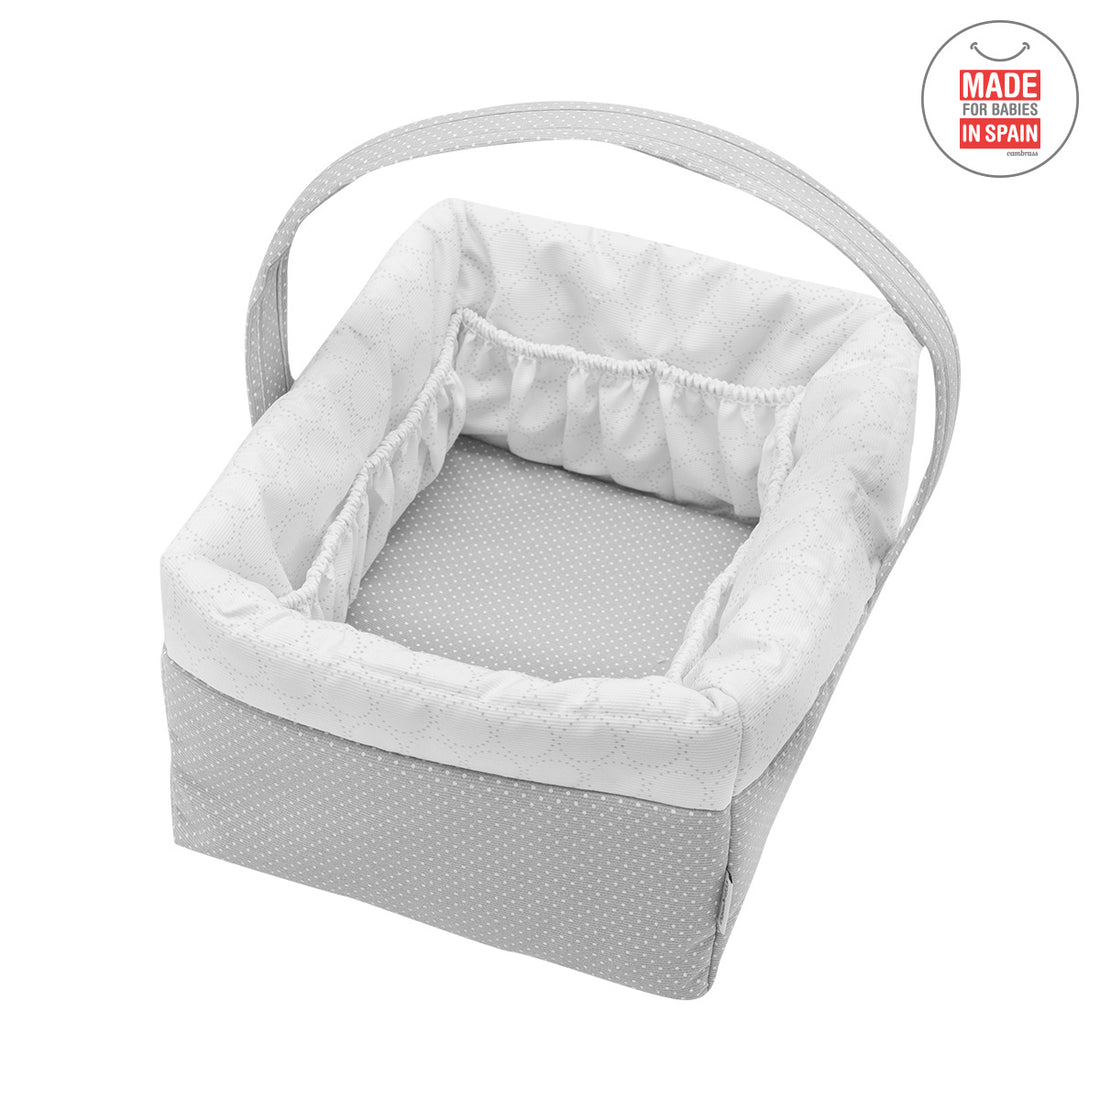 cambrass-layette-basket-pic-grey- (1)